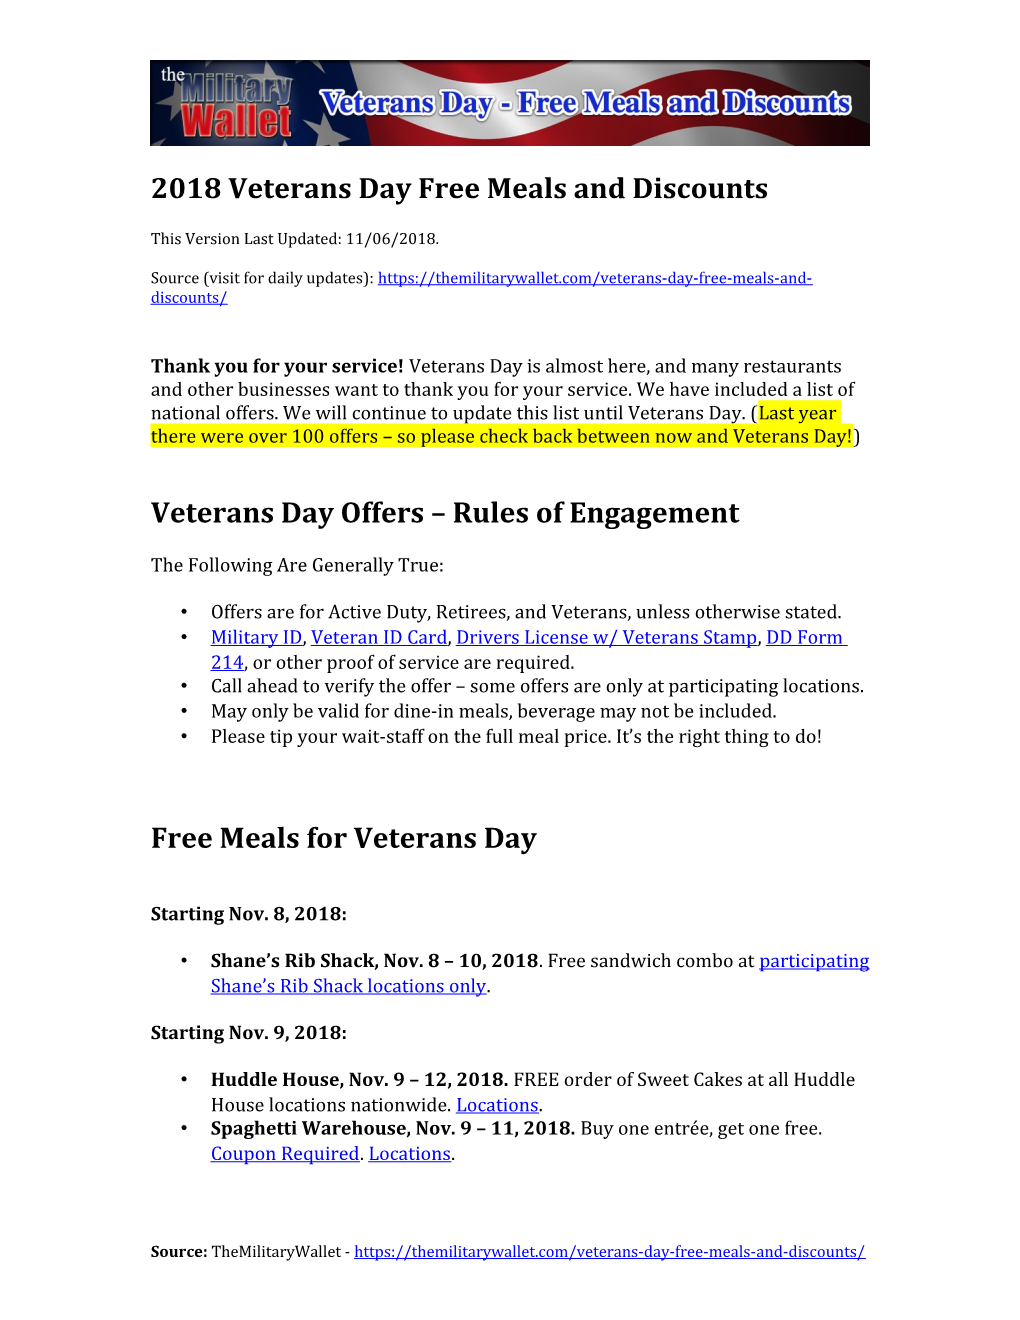 Rules of Engagement Free Meals for Veterans